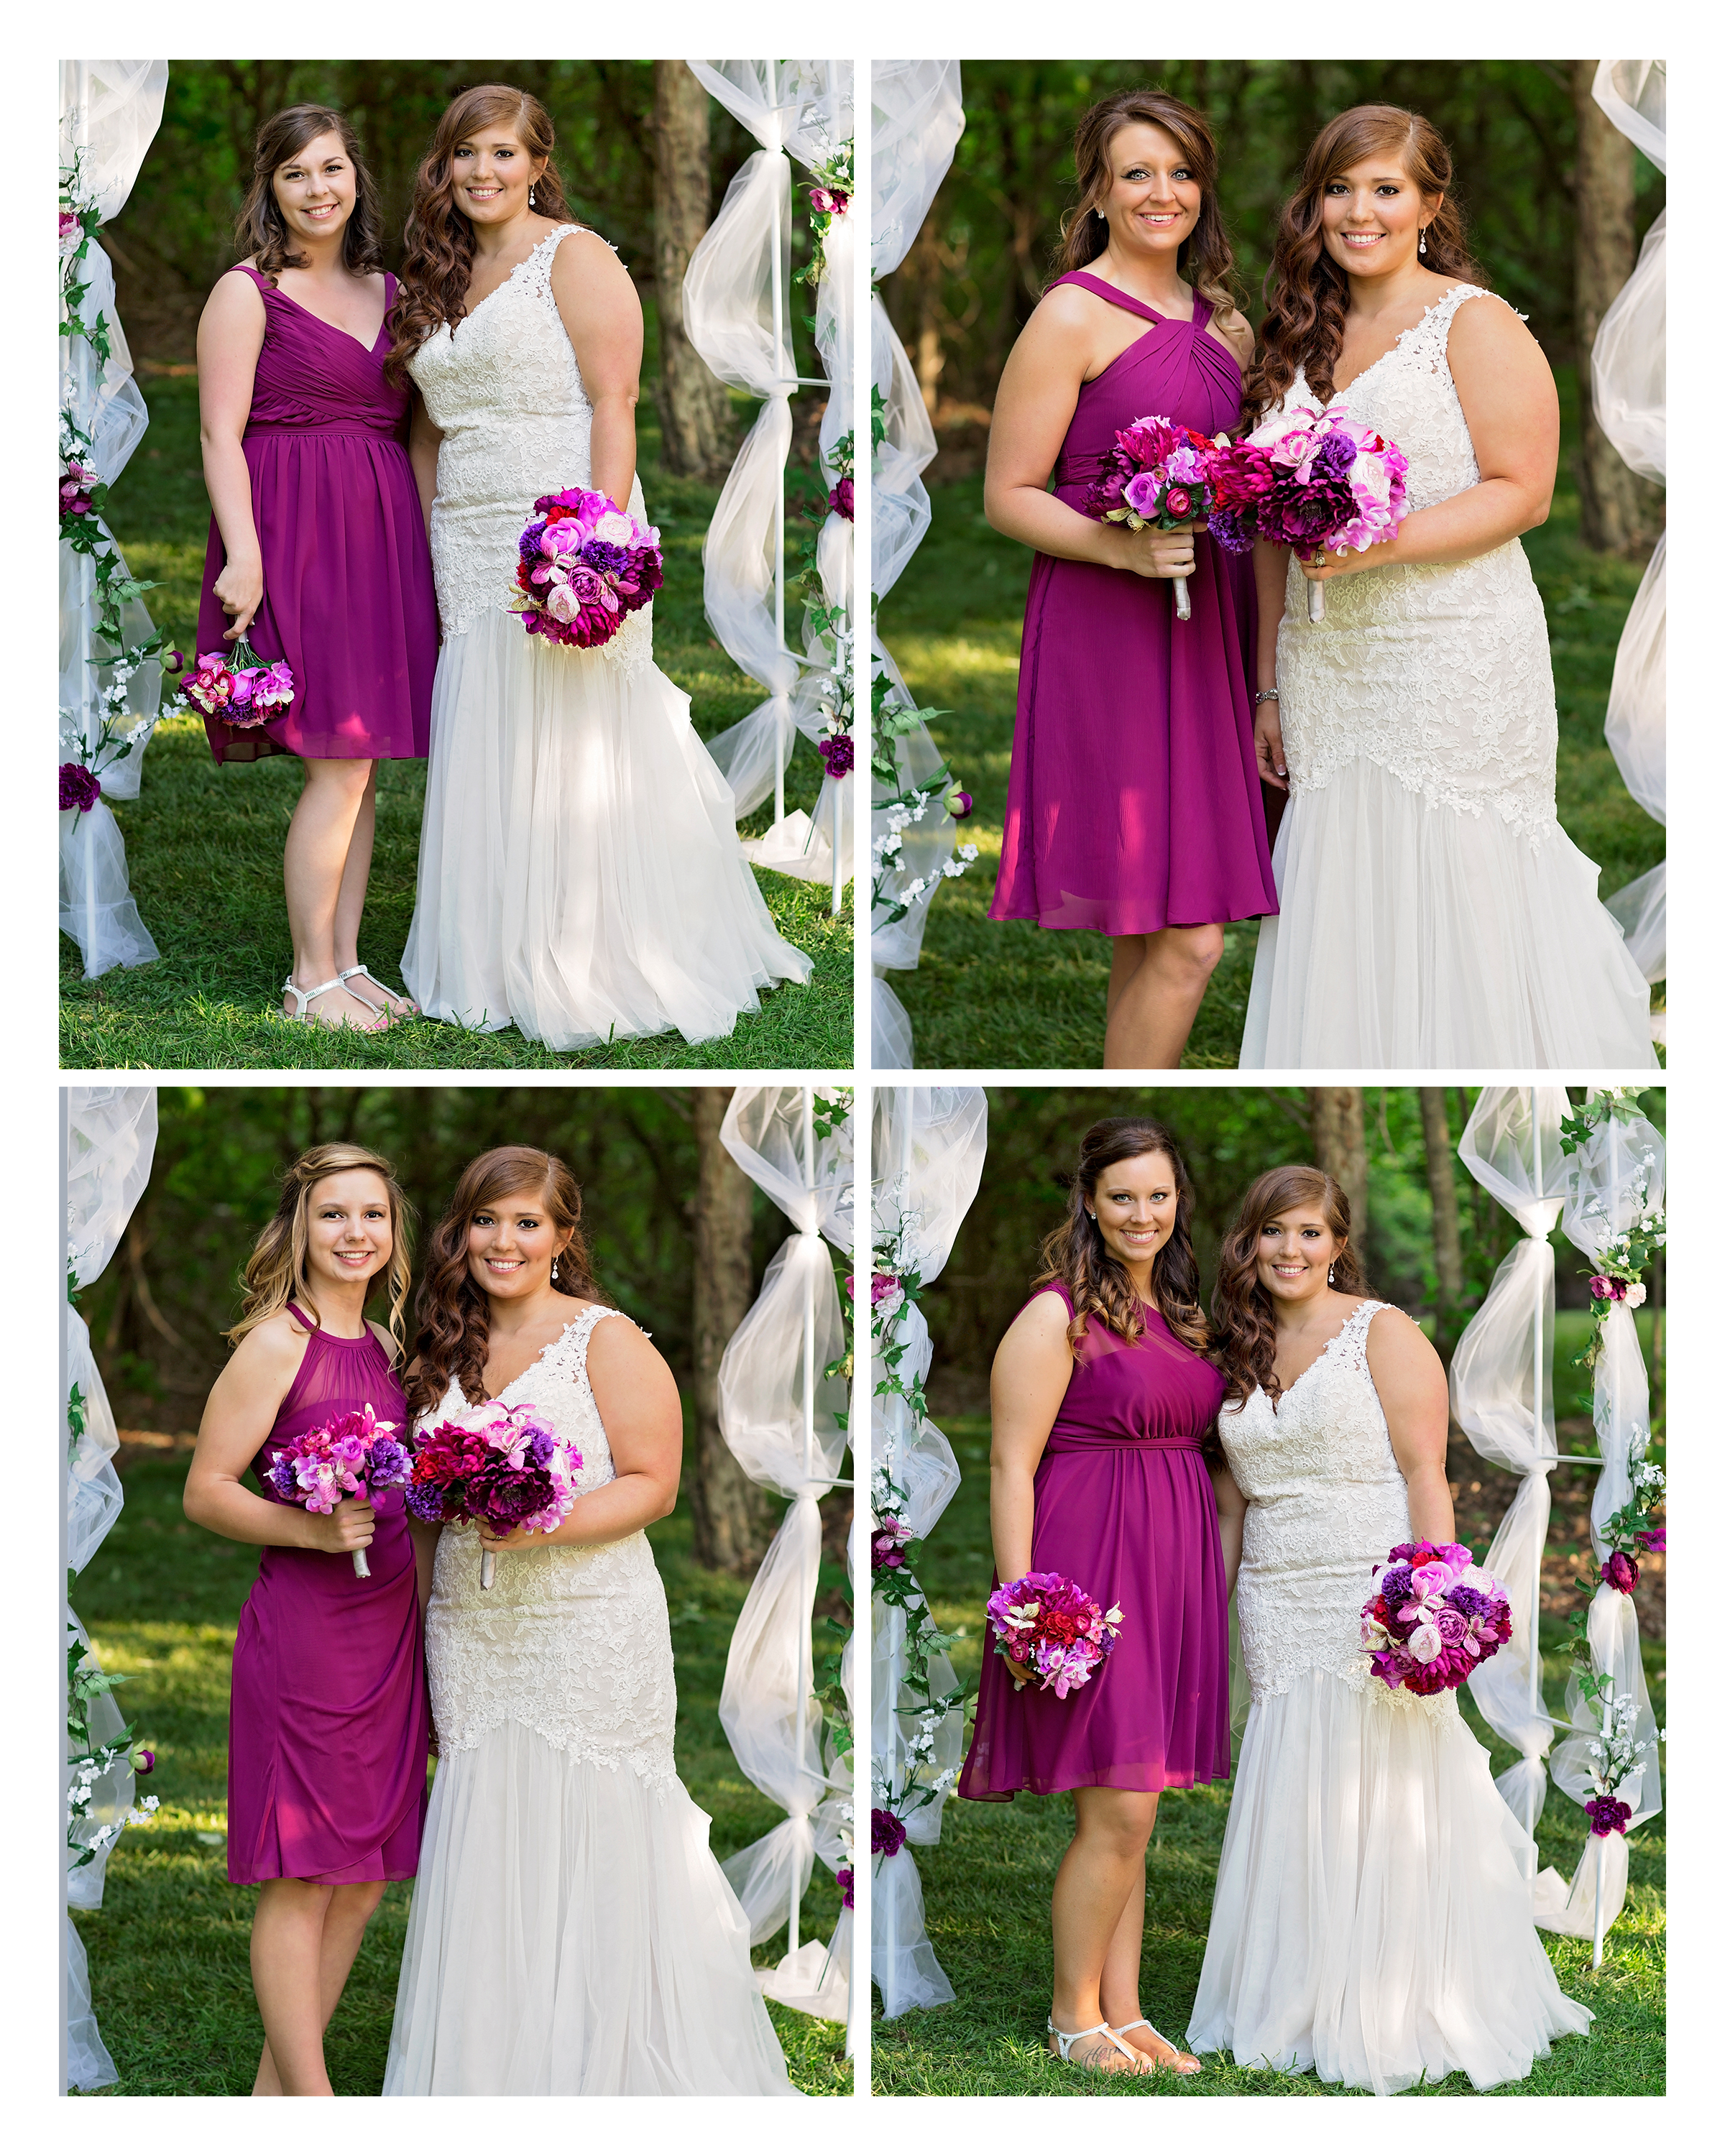 Bride with Maid-of-Honor and Bridesmaids